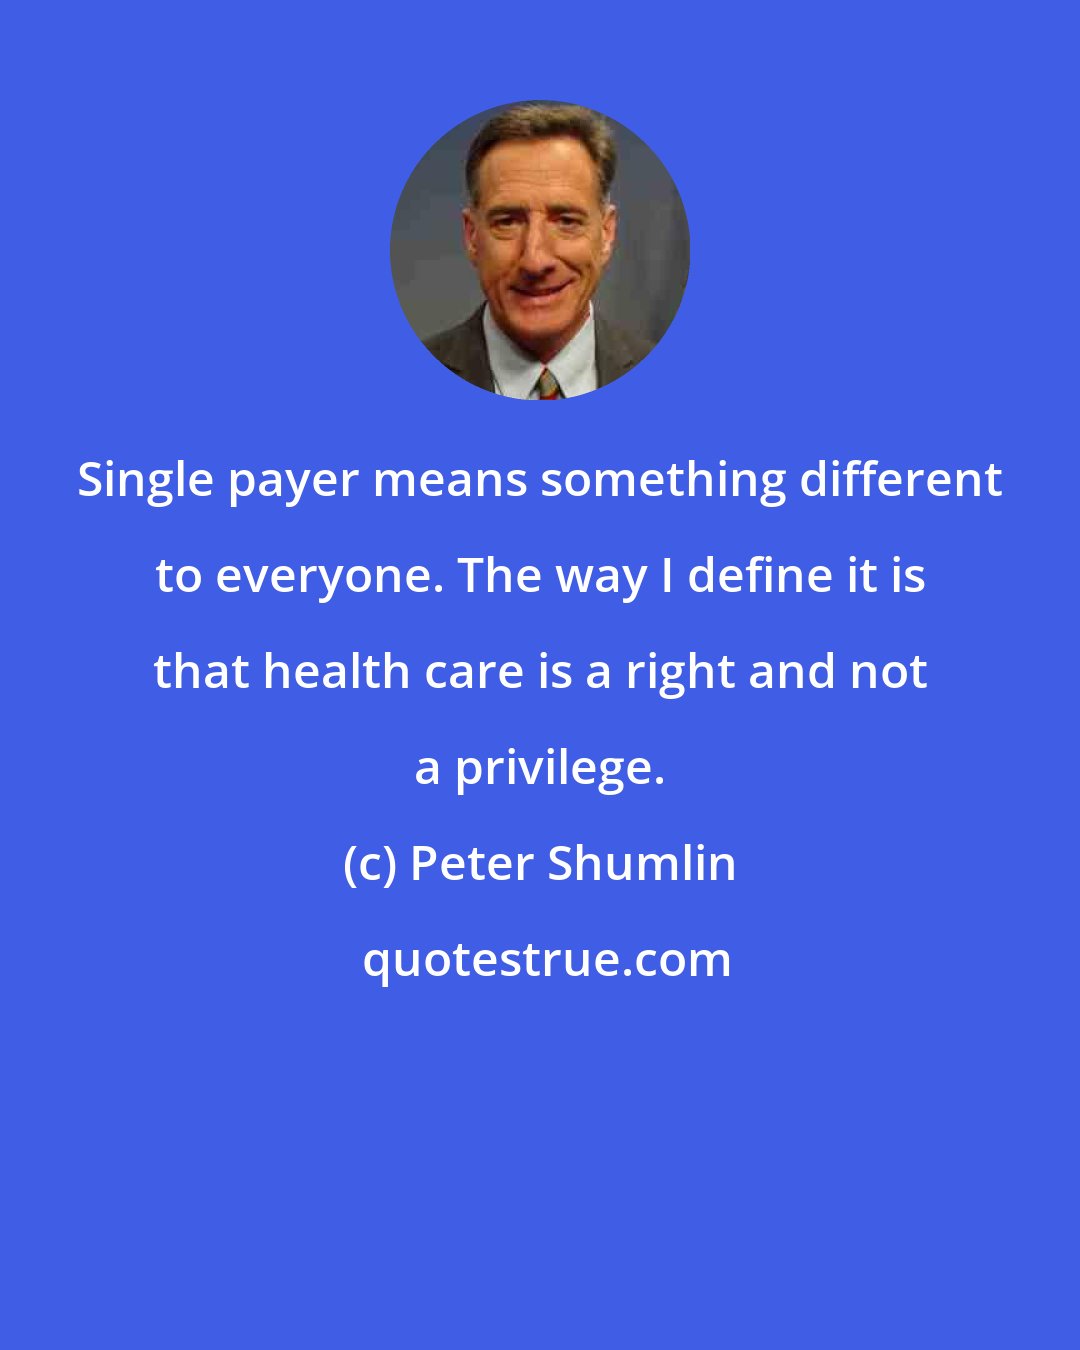 Peter Shumlin: Single payer means something different to everyone. The way I define it is that health care is a right and not a privilege.